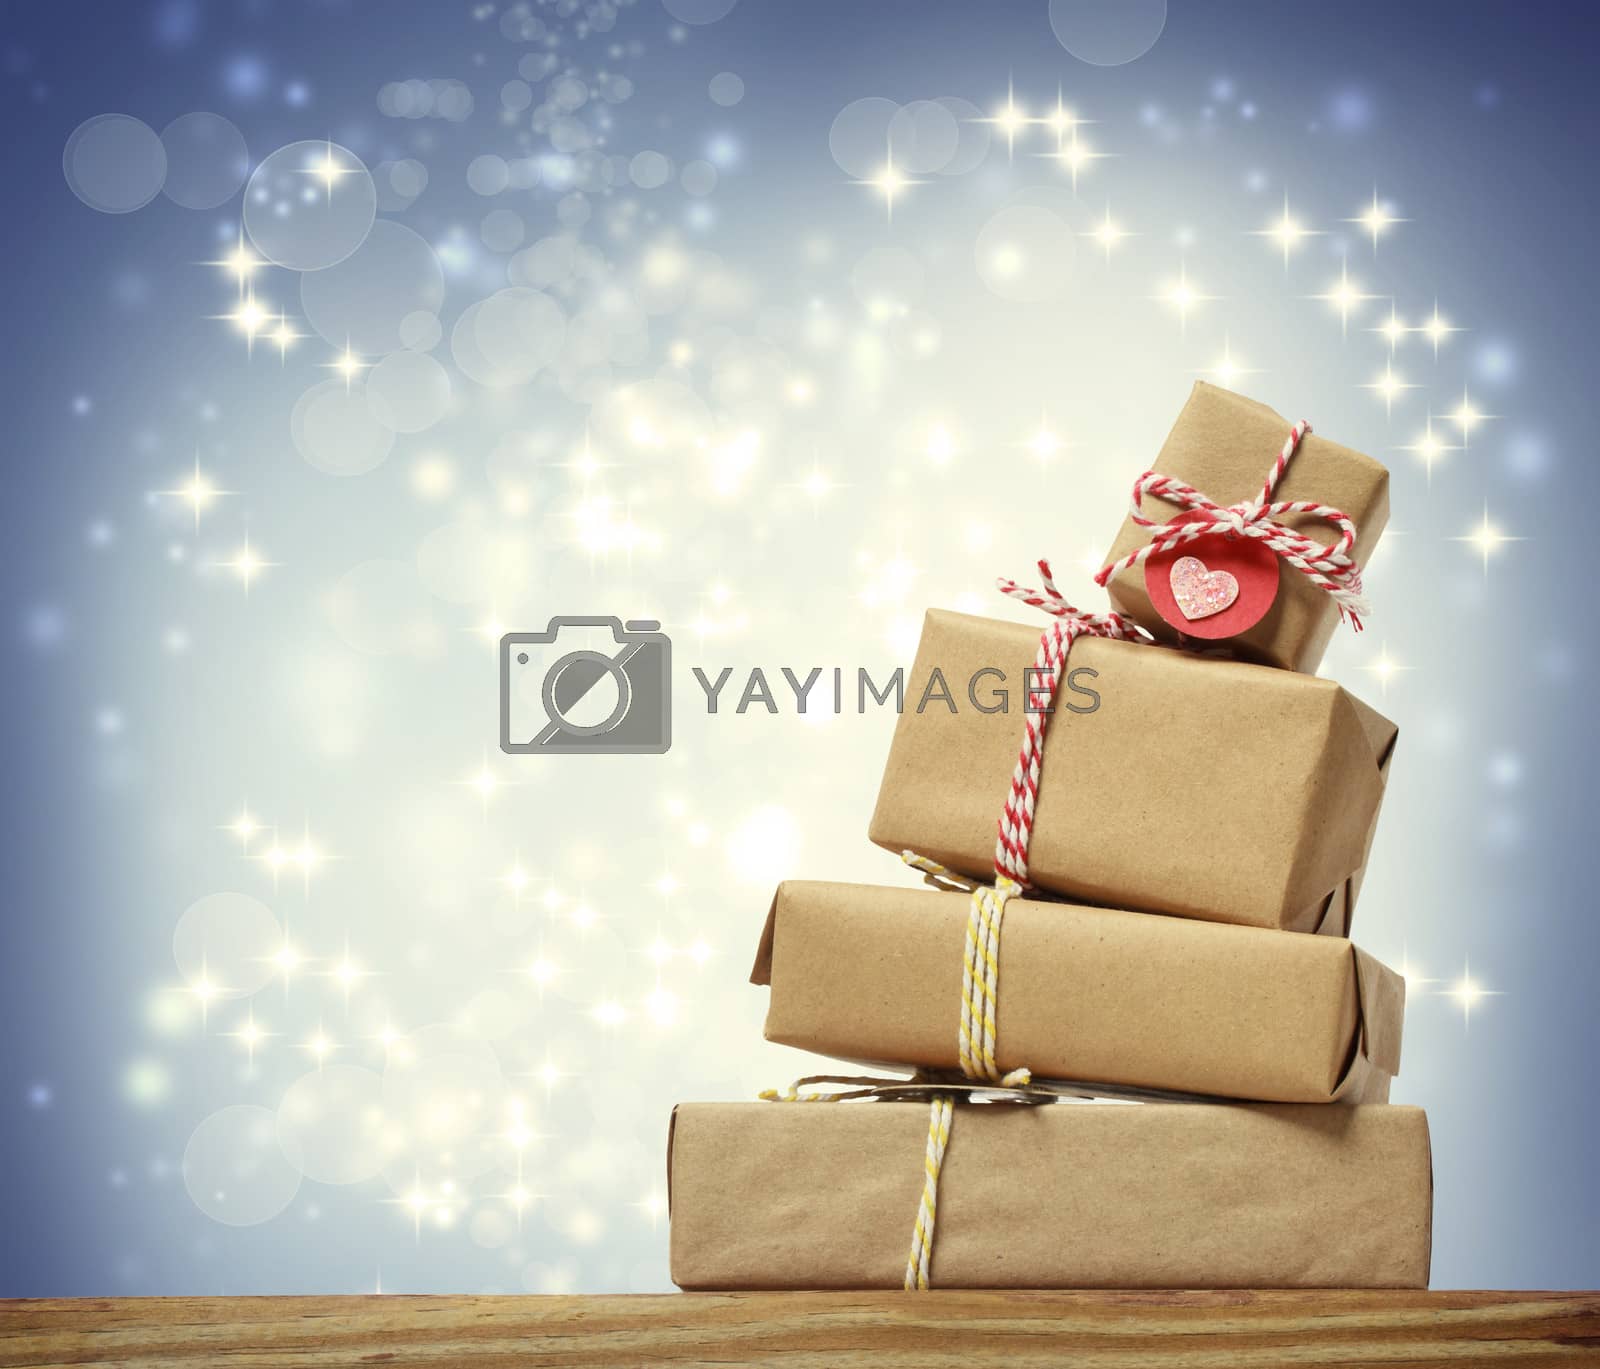 Royalty free image of Stack of handmade gift boxes over snowing night by melpomene